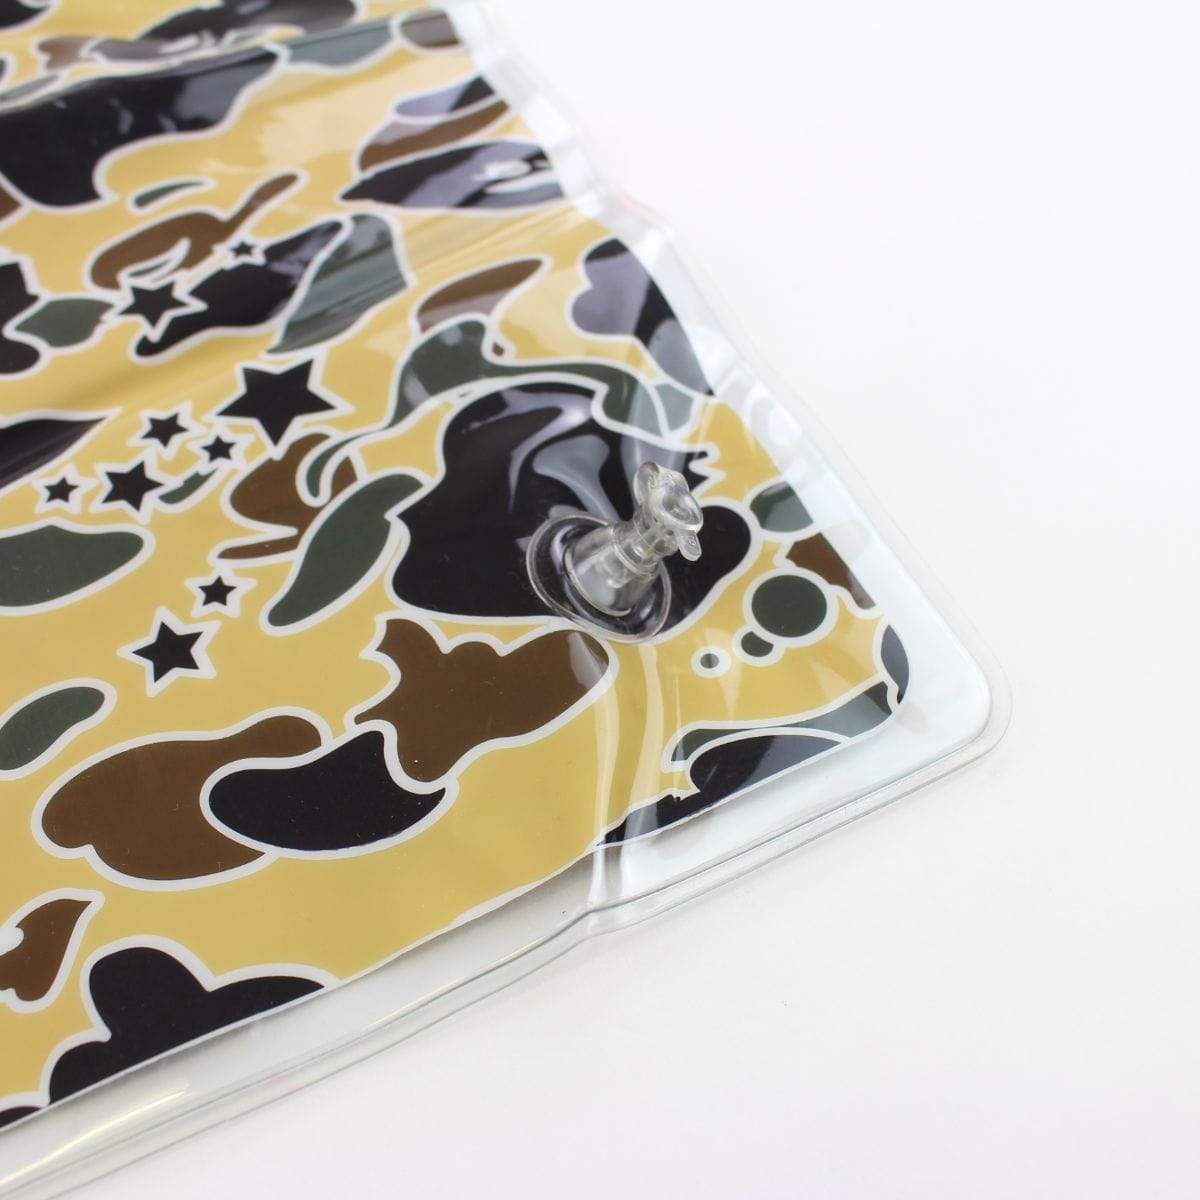 bape psyche camo inflatable pillow - SaruGeneral